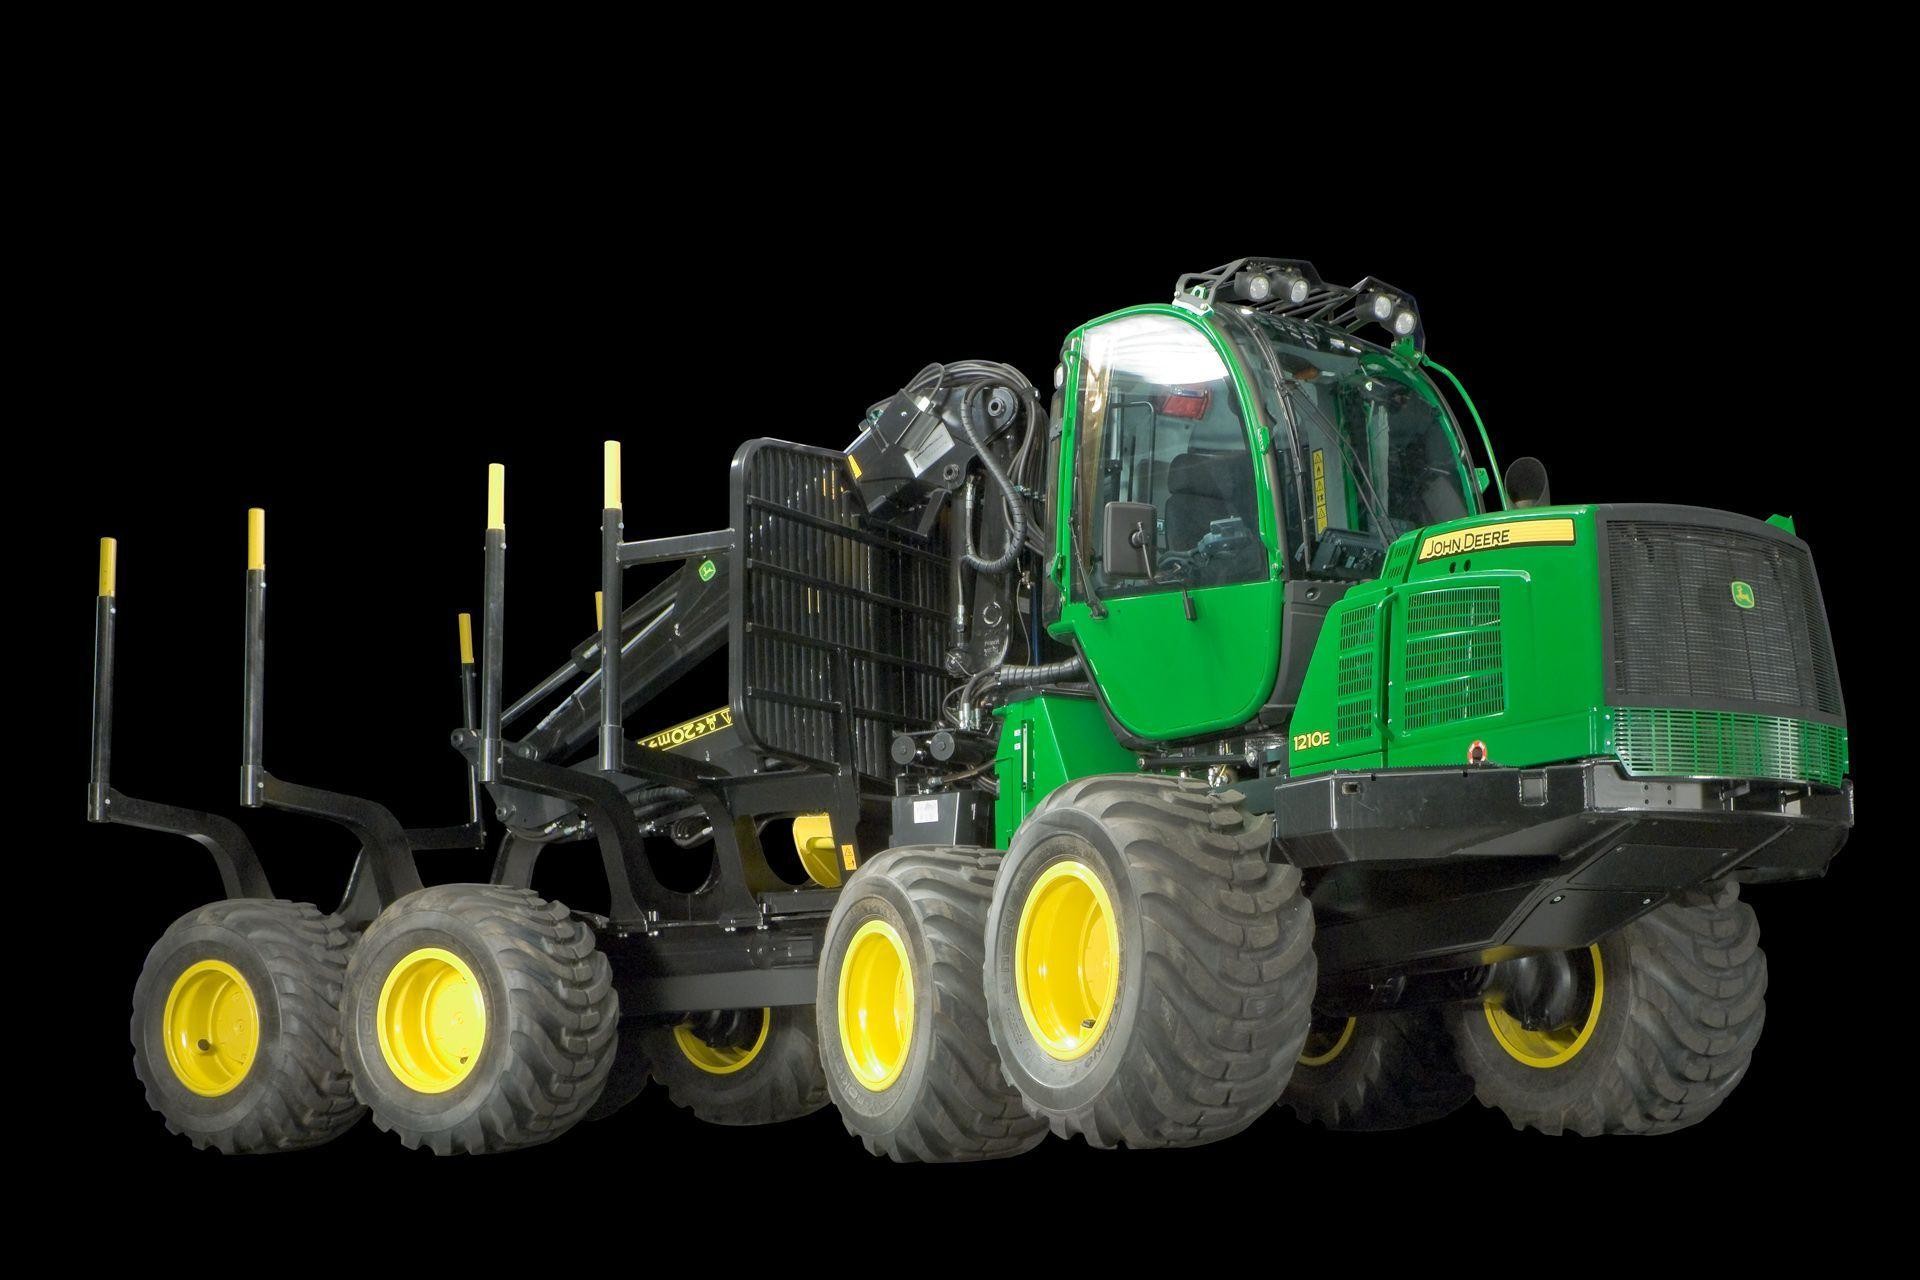 1920x1280 Free HD John Deere Wallpapers | Wallpapers, Backgrounds, Images .